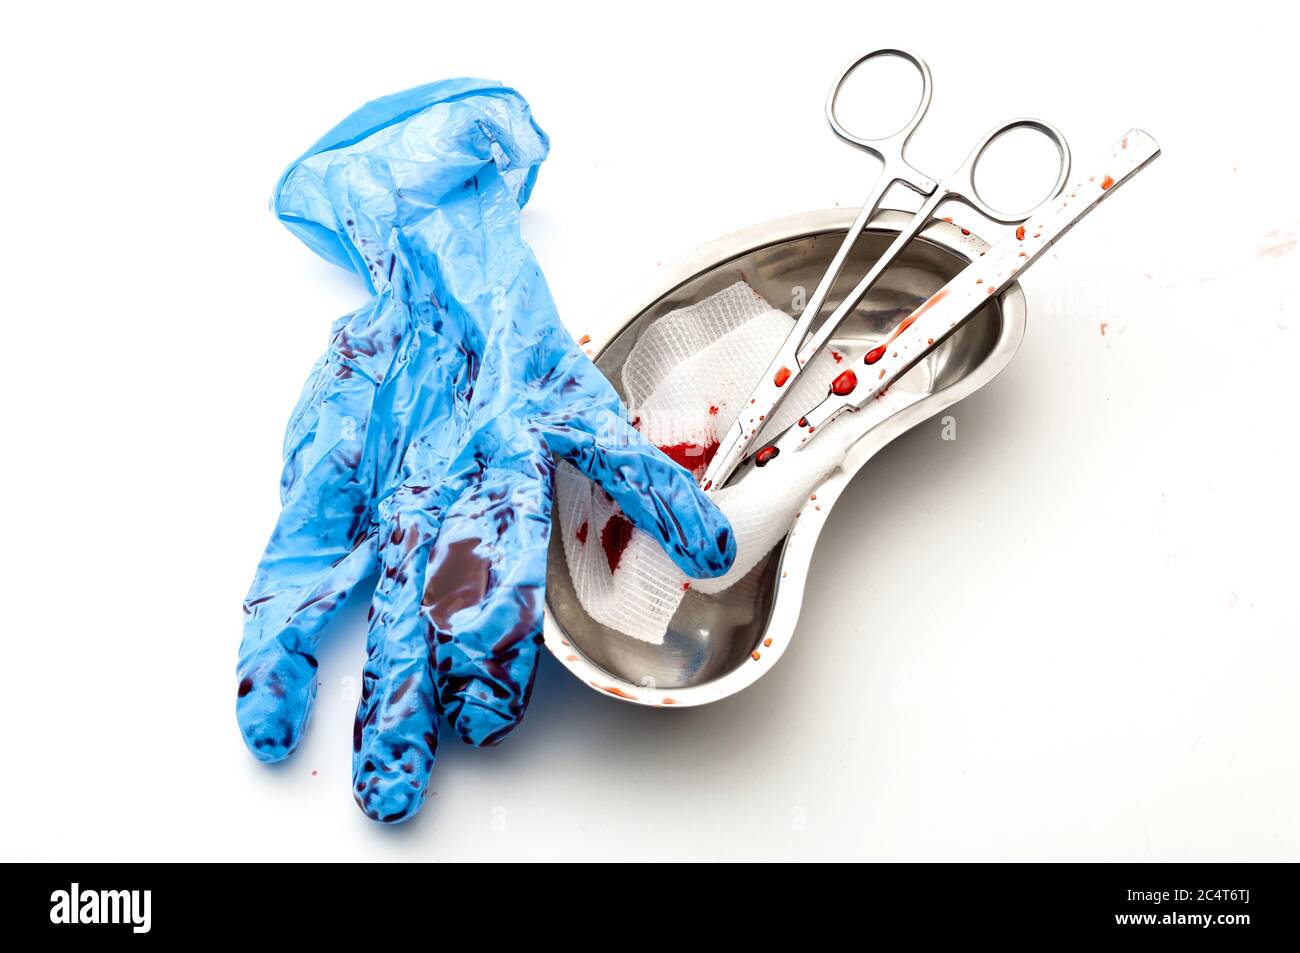 Surgery, bloody medical instruments and dirty operating room concept theme with scalpel, cotton swab, surgical scissors and latex gloves covered in bl Stock Photo